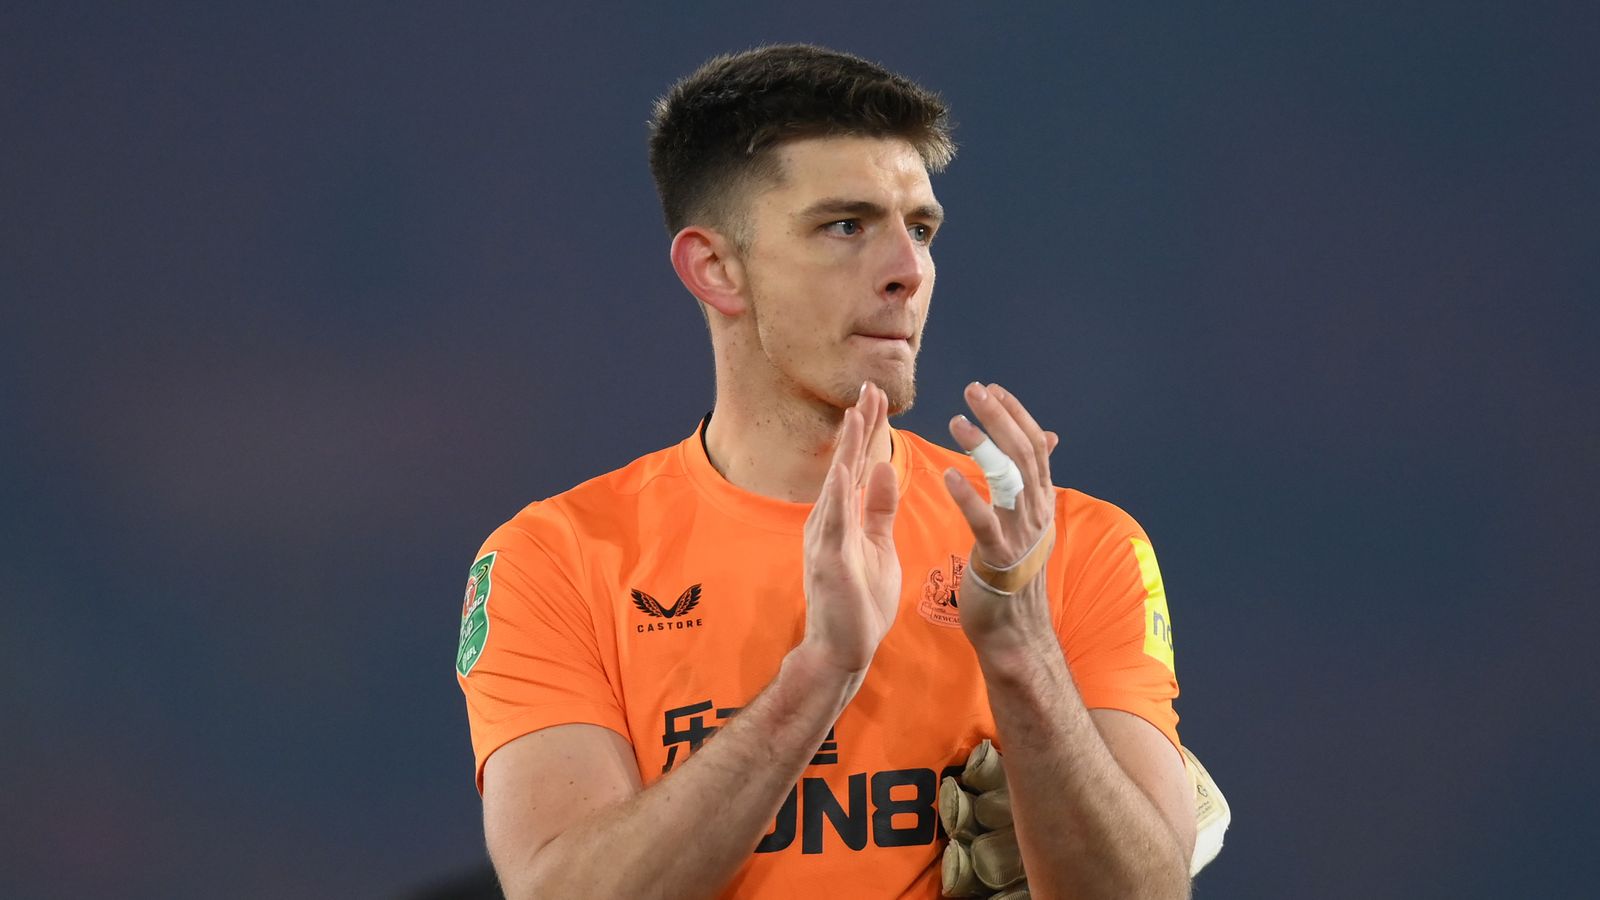 Nick Pope hailed as ‘best goalkeeper in the world’ by Newcastle team-mate Bruno Guimaraes after 10th straight clean sheet